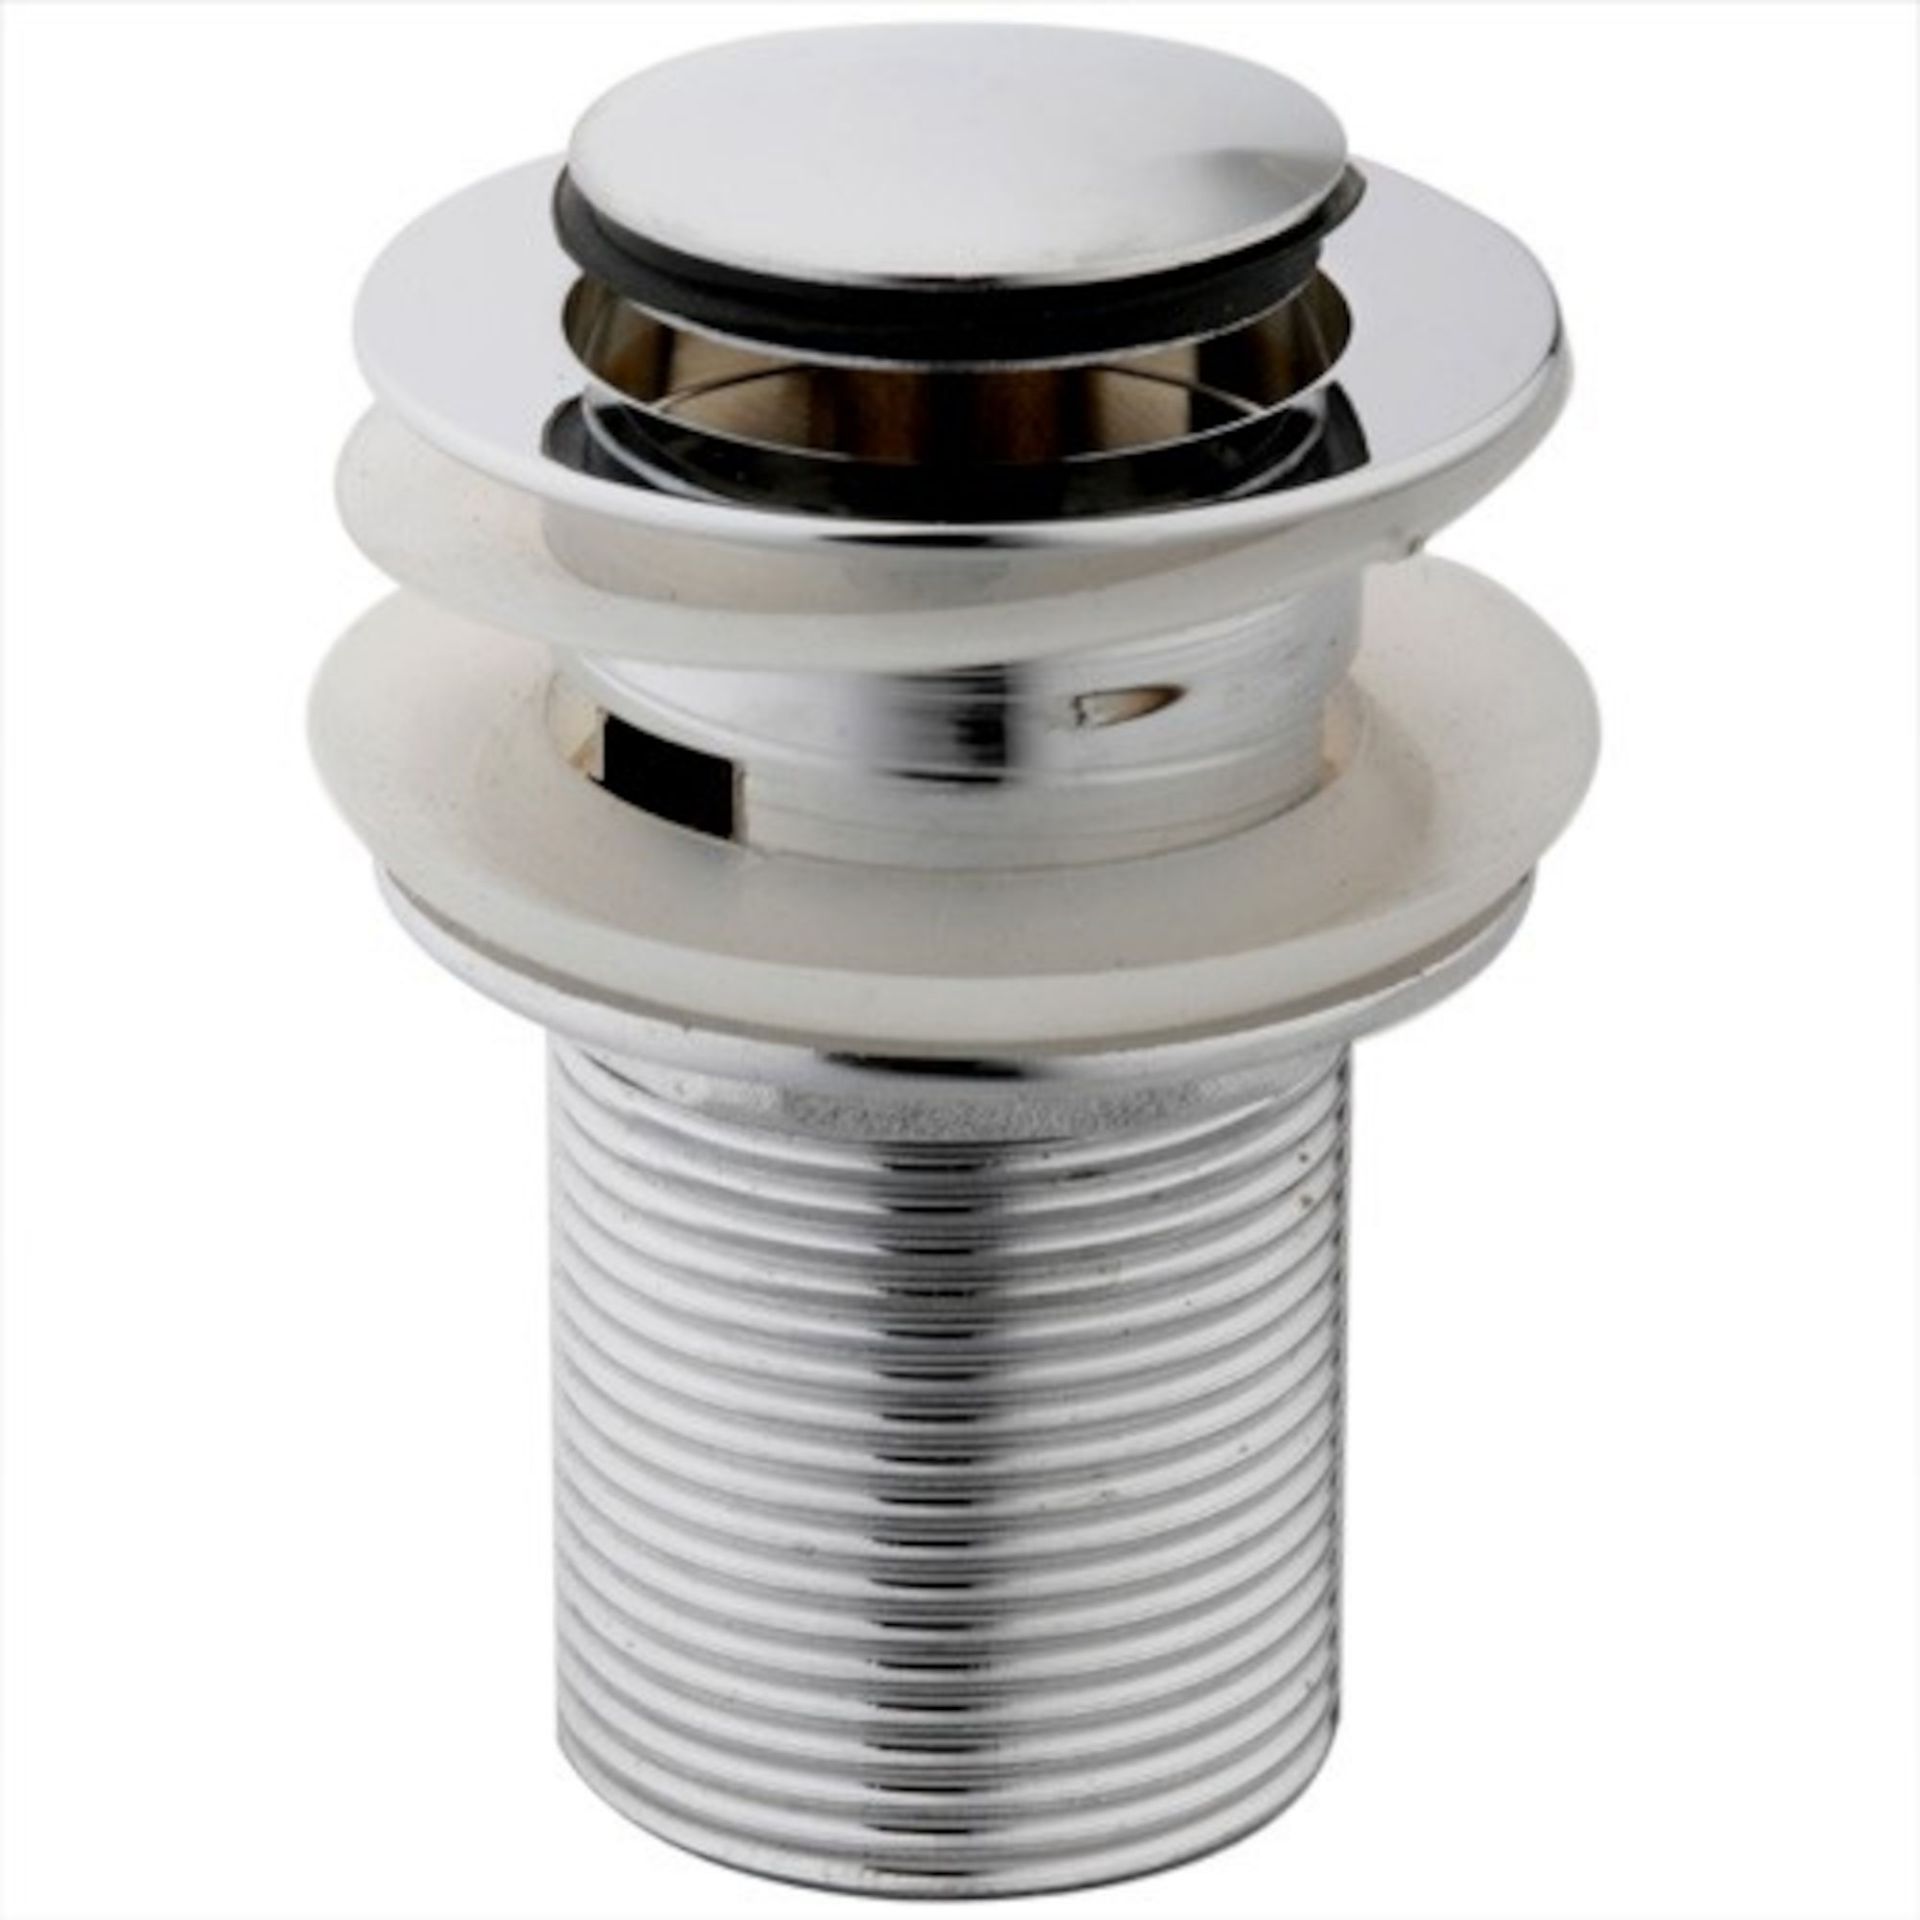 (NV1023) Basin Waste - Slotted Push Button Pop-Up Made with zinc with solid brass components ... - Image 2 of 2